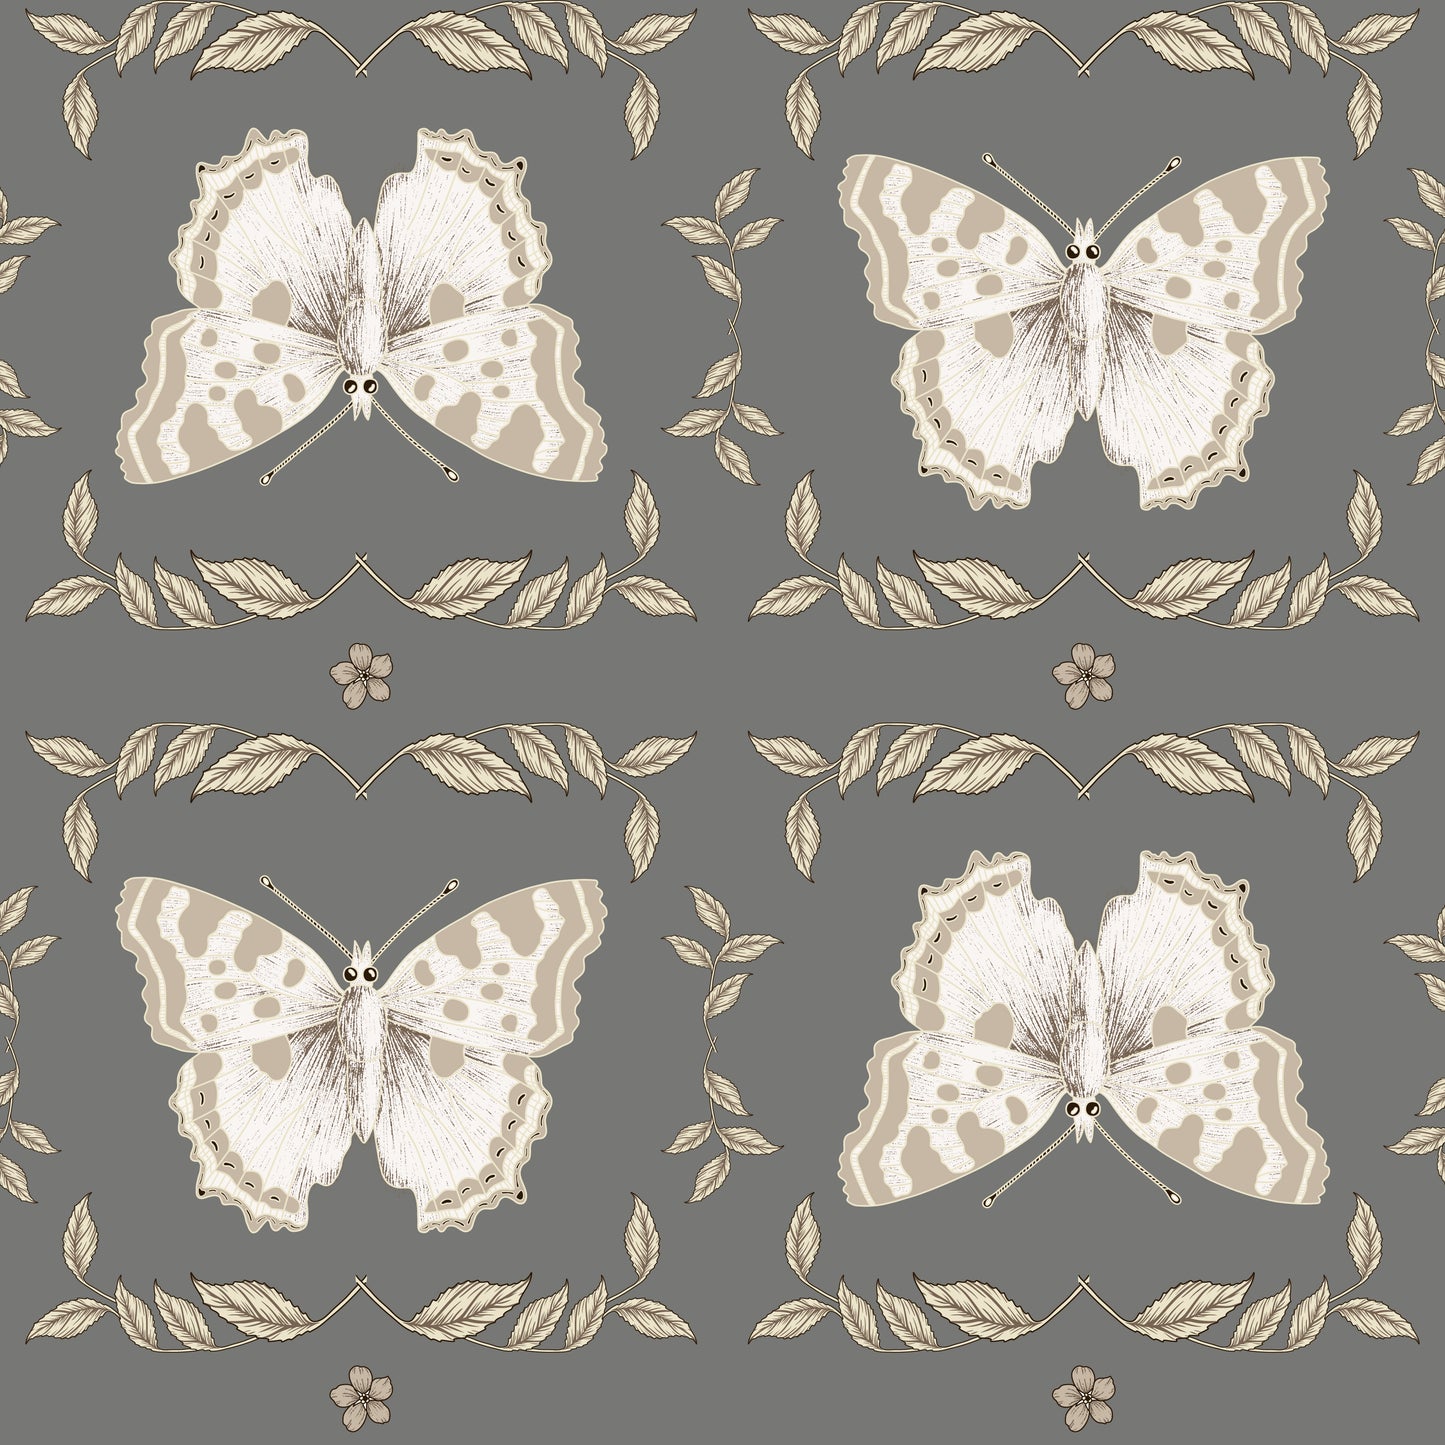 Neutral butterflies on grey/gray background easy to install and remove peel and stick custom wallpaper available in different lengths/sizes locally created and printed in Canada. Removable, washable, durable, commercial grade, customizable and water proof.